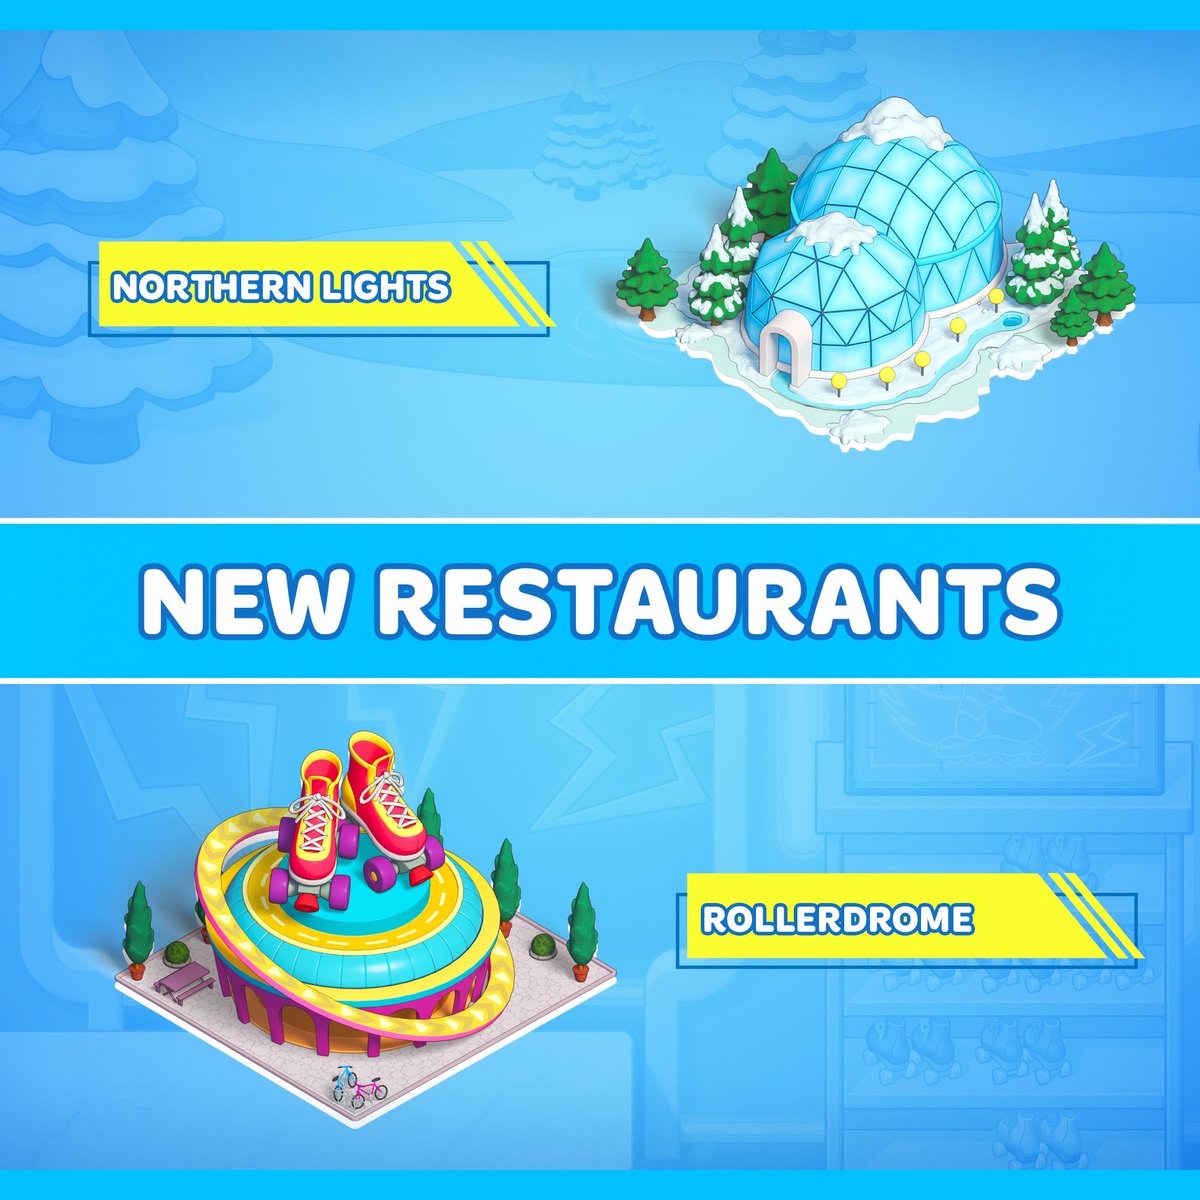 Latest Cooking Diary update drop! 🌟 Brace yourself for a culinary adventure and get a look at what we've prepared especially for you:

TASTY HILLS SECRETS
• Athlete Dwayne tries his hand at being a mentor. 🏋️
• Get Dwayne as an assistant! 🤝

NEW RESTAURANTS
• Open Northern… https://t.co/KcYcfRAf77 